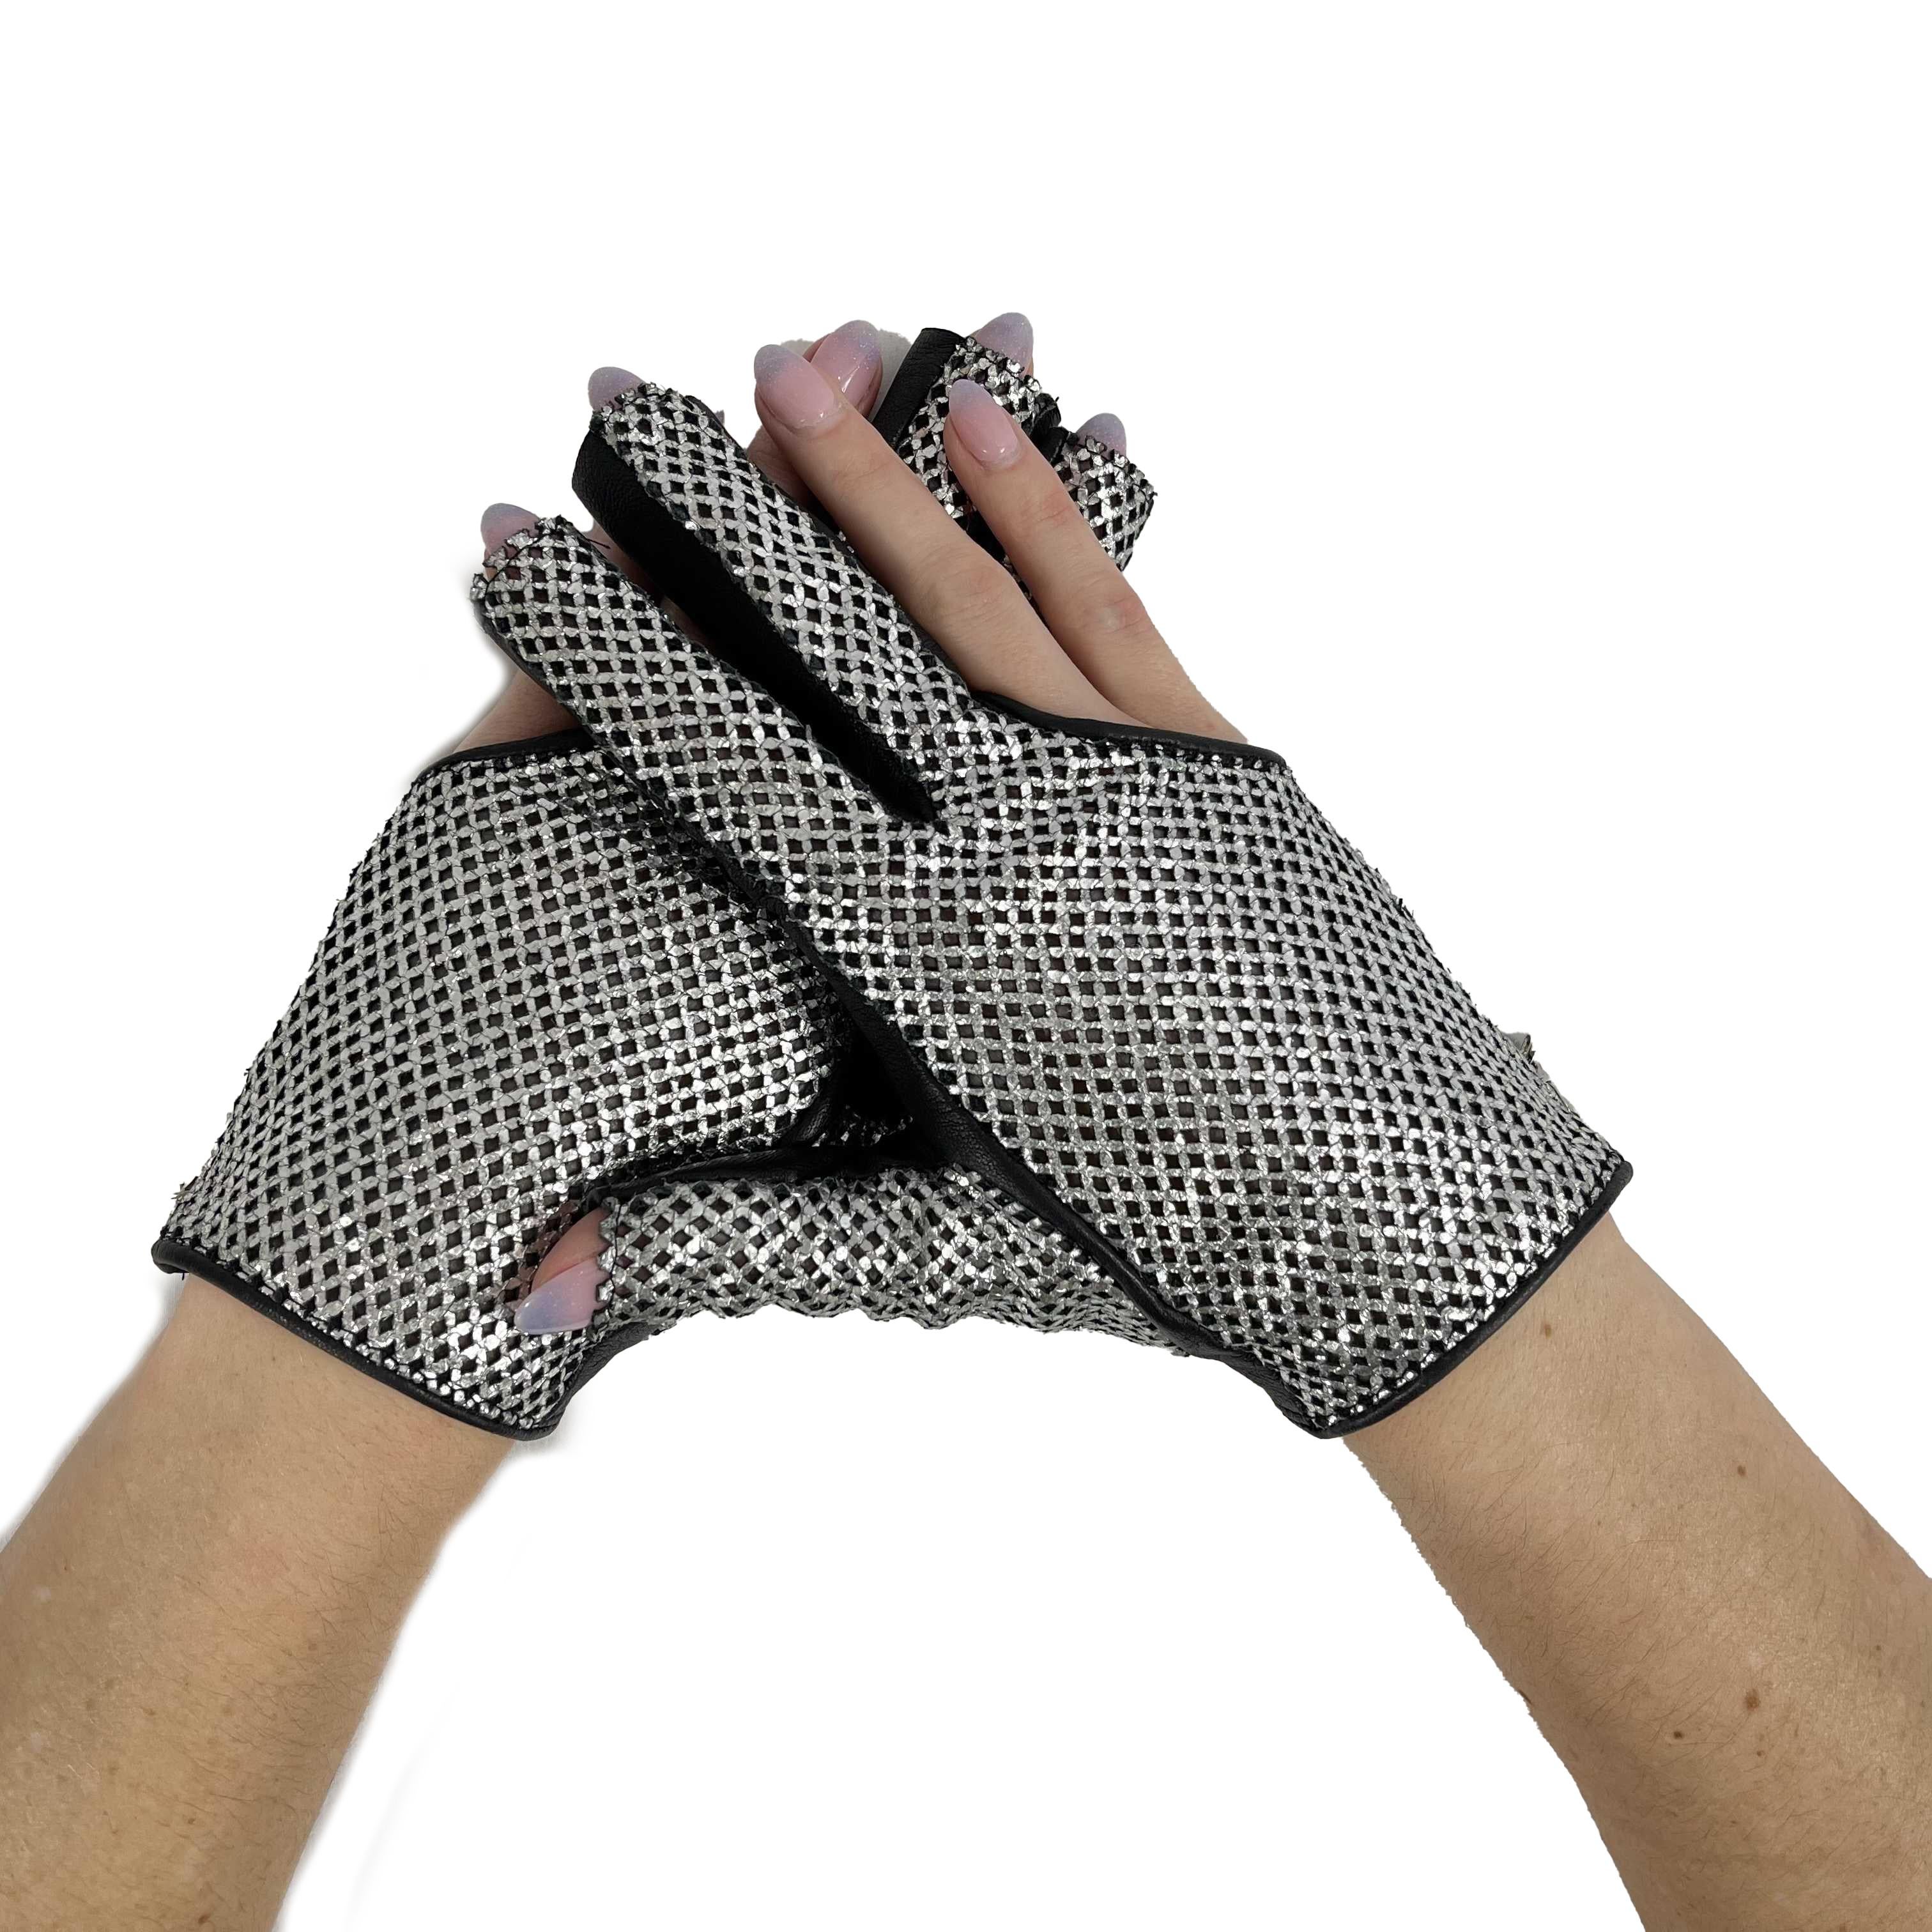 CHANEL 2008 Act 1 Black / Metallic Silver Mesh Leather Gloves 7.5 8